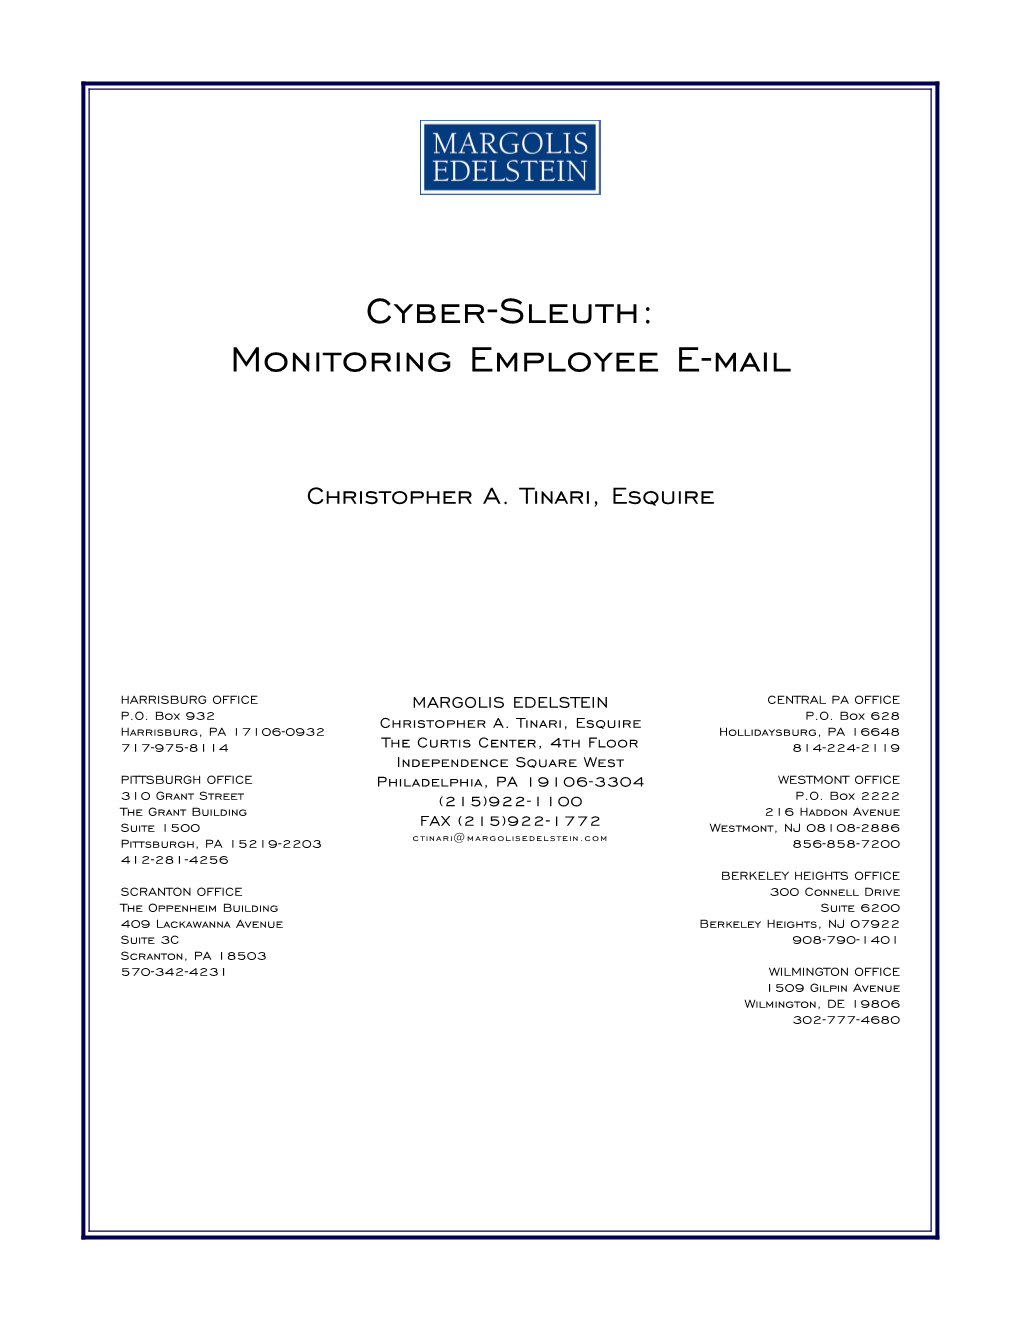 Cyber-Sleuth: Monitoring Employee E-Mail